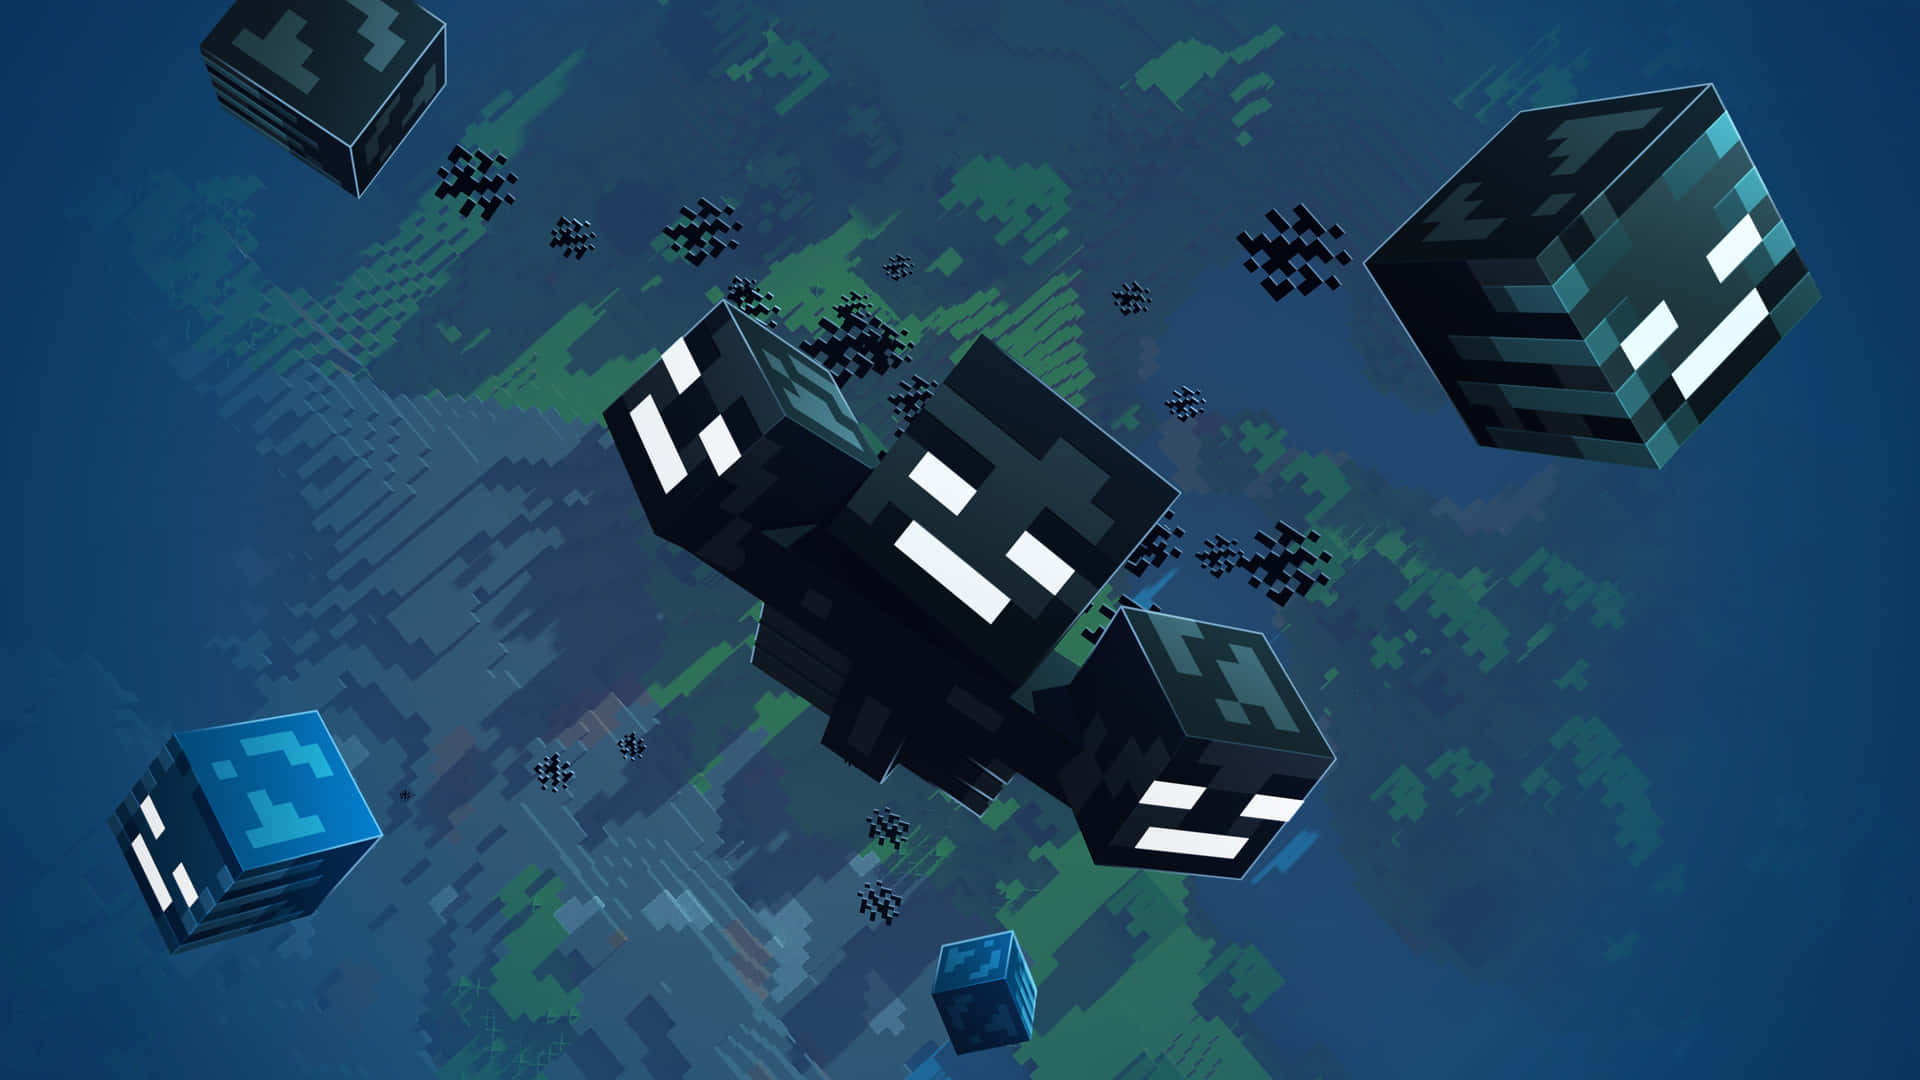 A powerful Minecraft Wither wreaking havoc in the game world Wallpaper